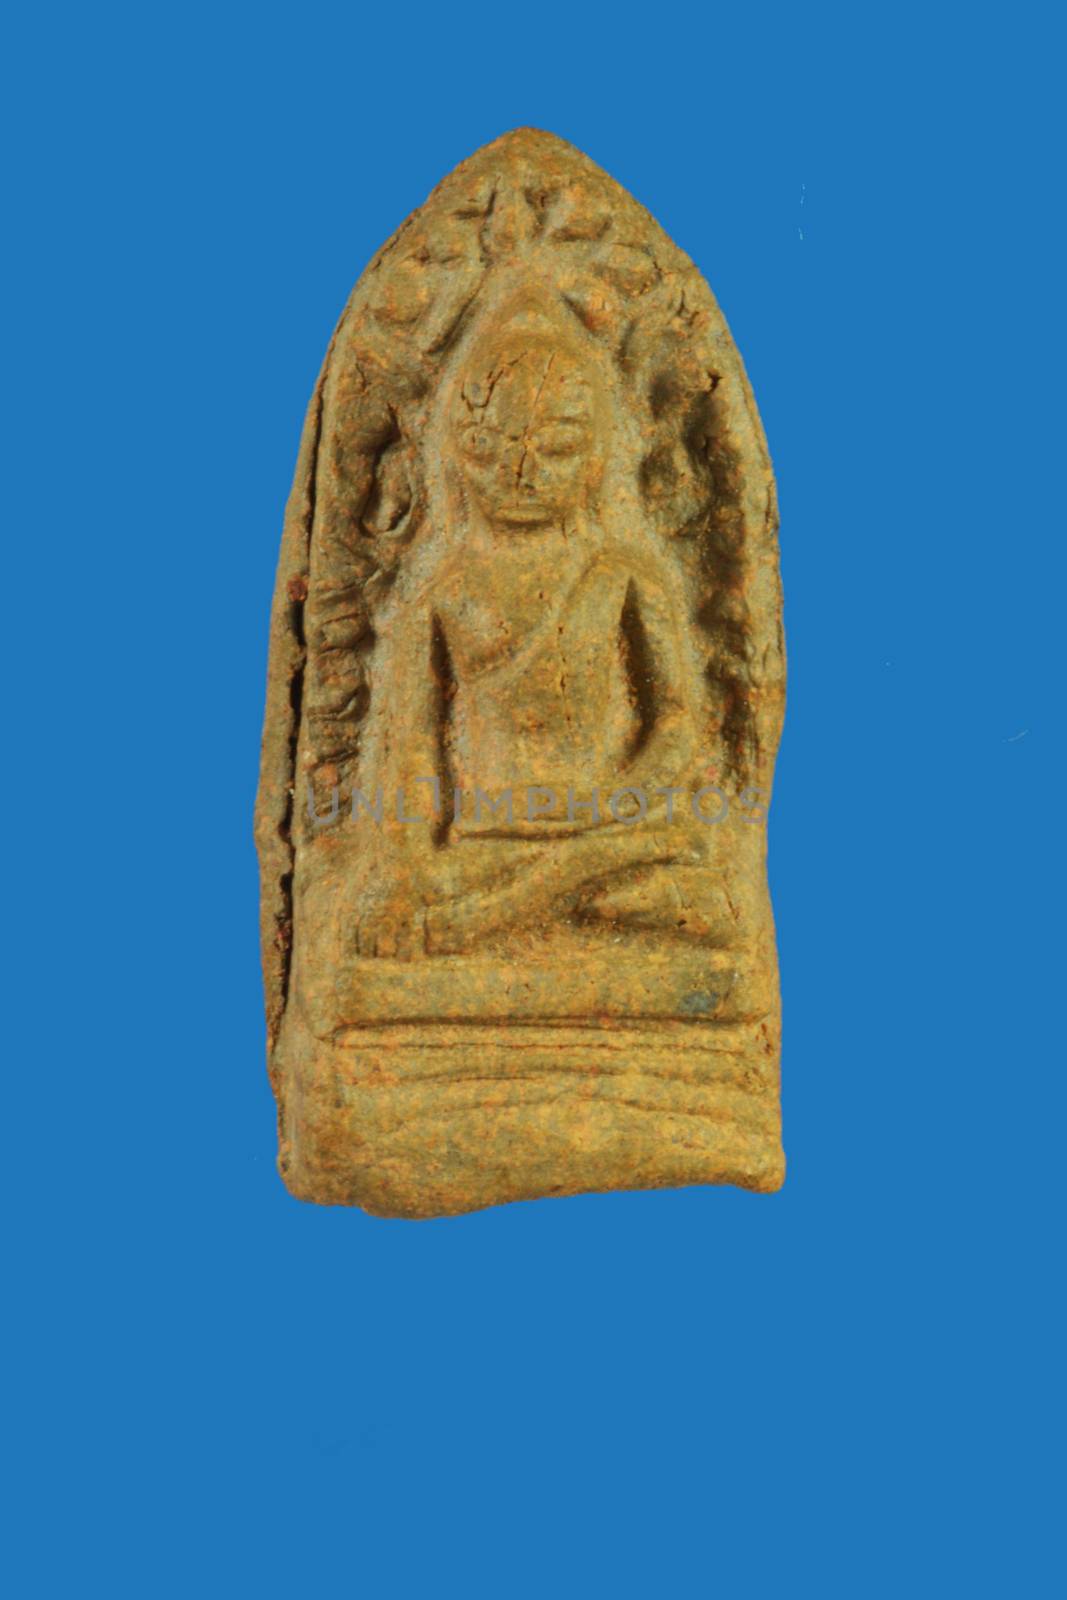 Phra Rod is the oldest amulet in Thailand, found at Wat Mahawan, Lampoon Province in Northern of Thailand by ideation90